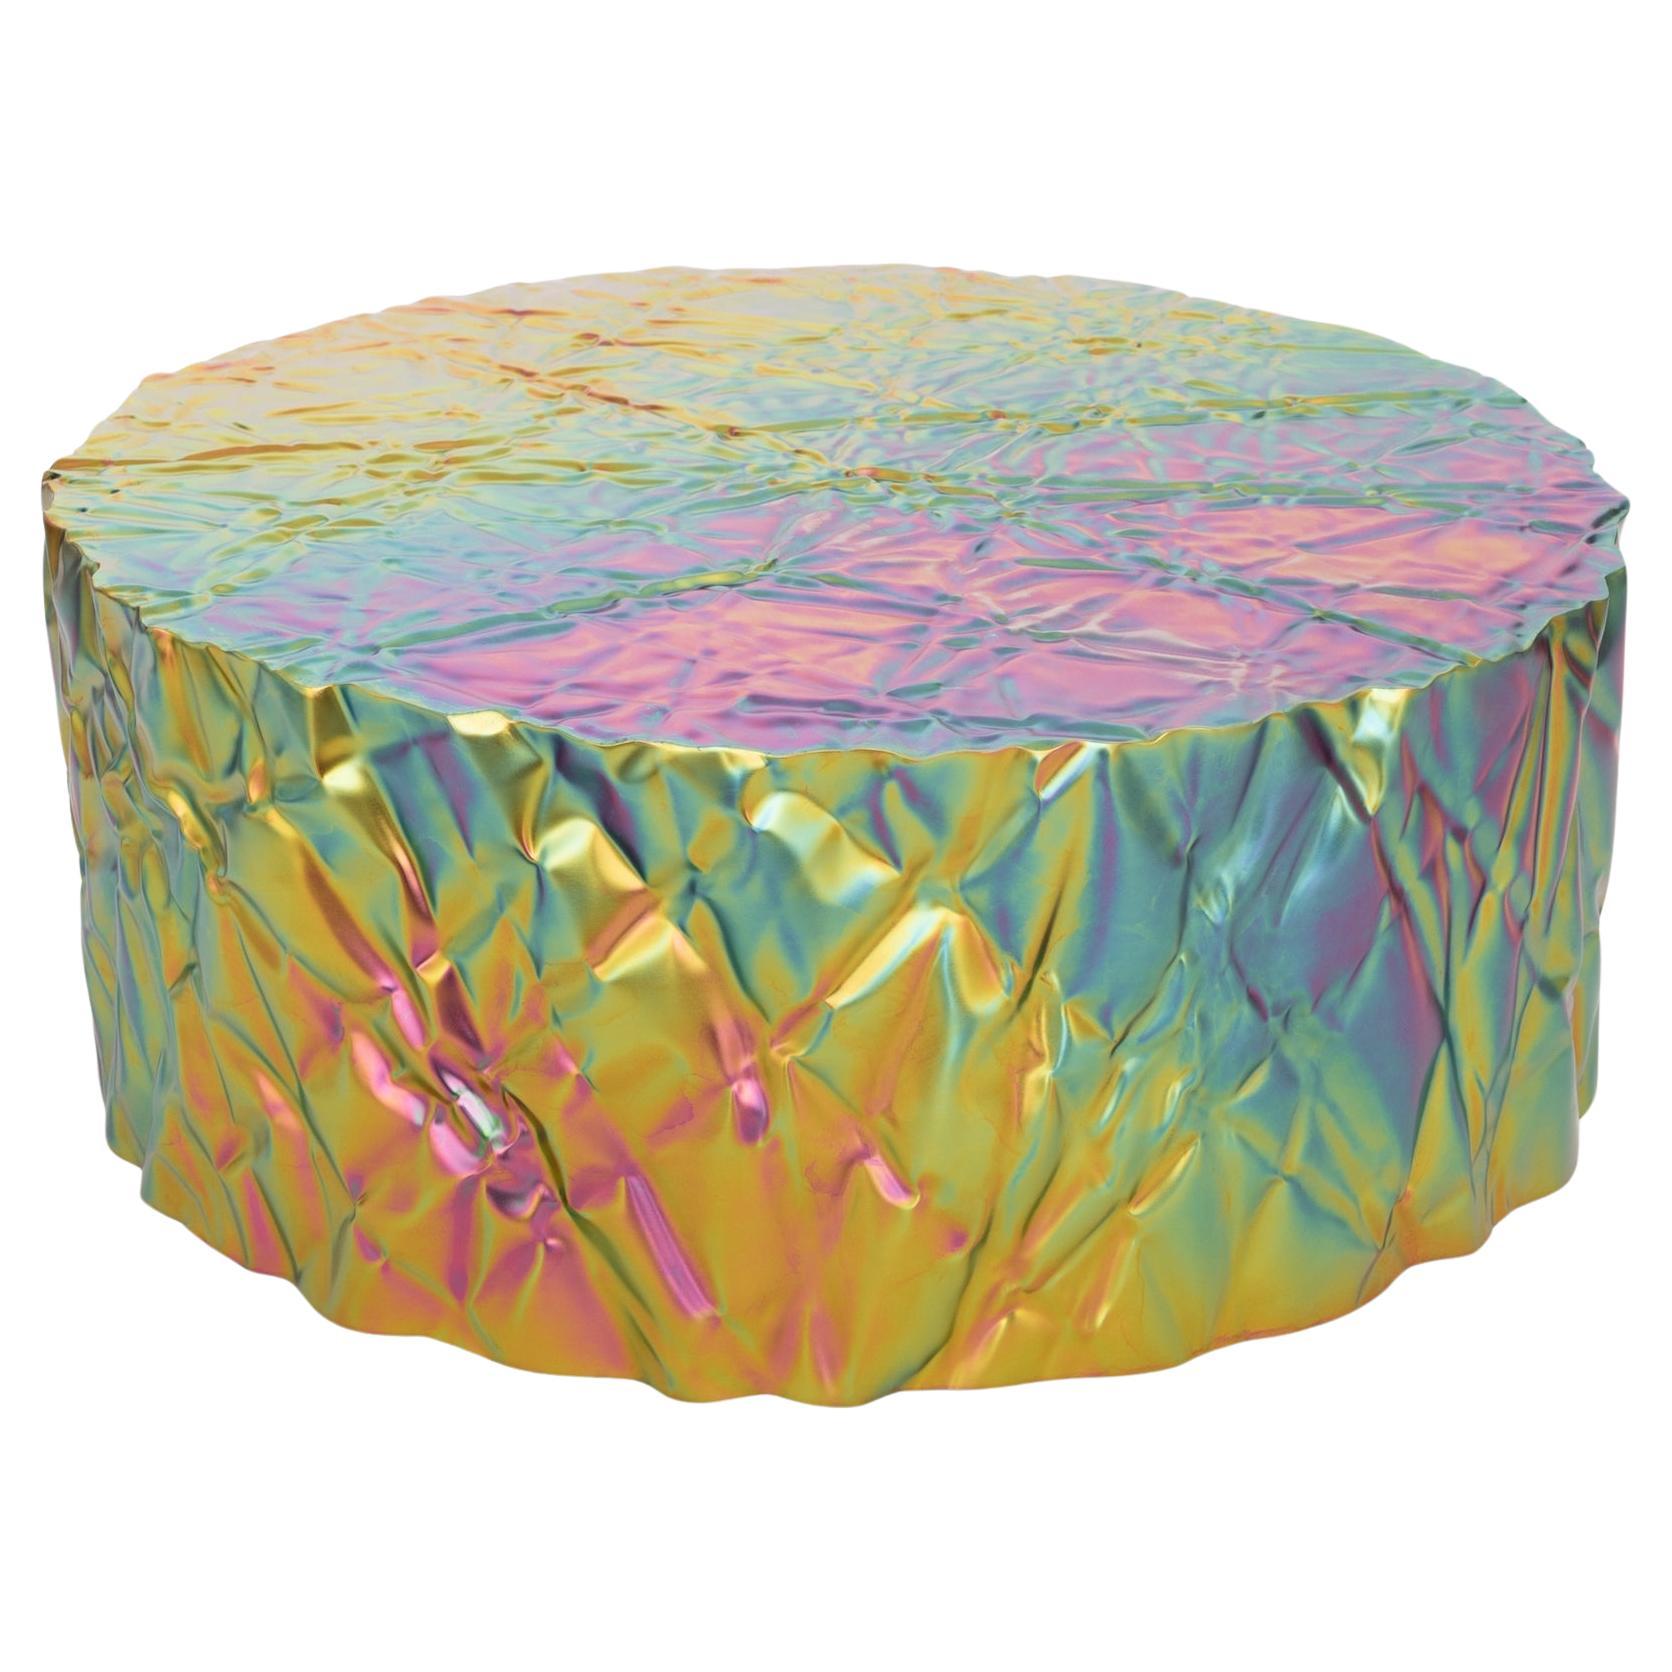 Christopher Prinz “Cylindrical Wrinkled Coffee Table” in Raw Rainbow Iridescent For Sale